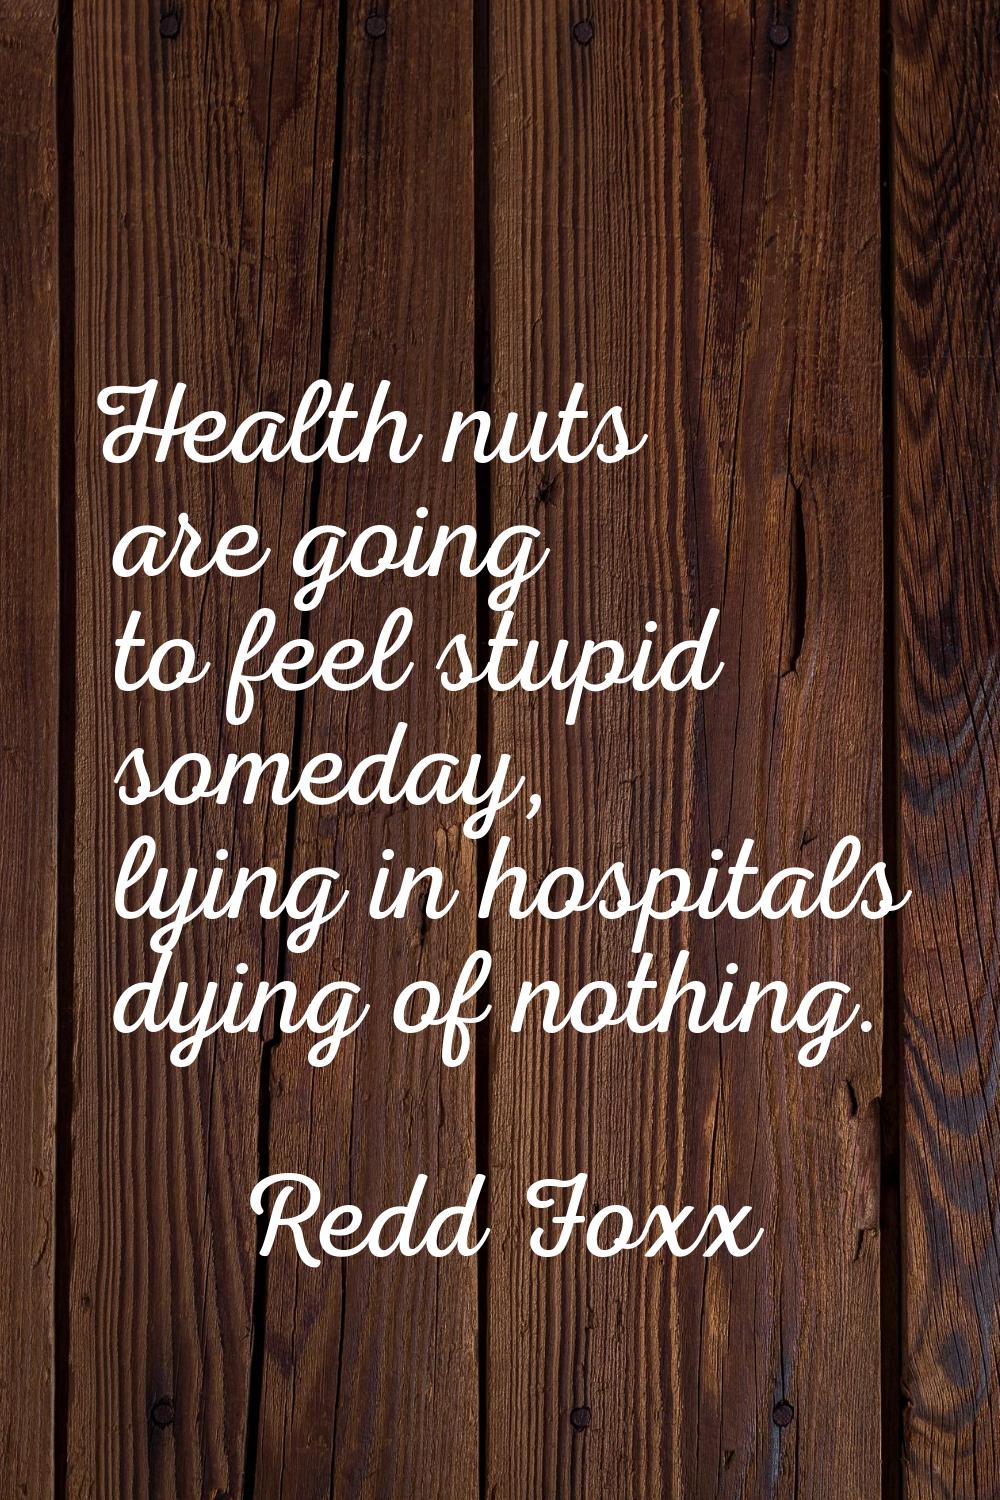 Health nuts are going to feel stupid someday, lying in hospitals dying of nothing.